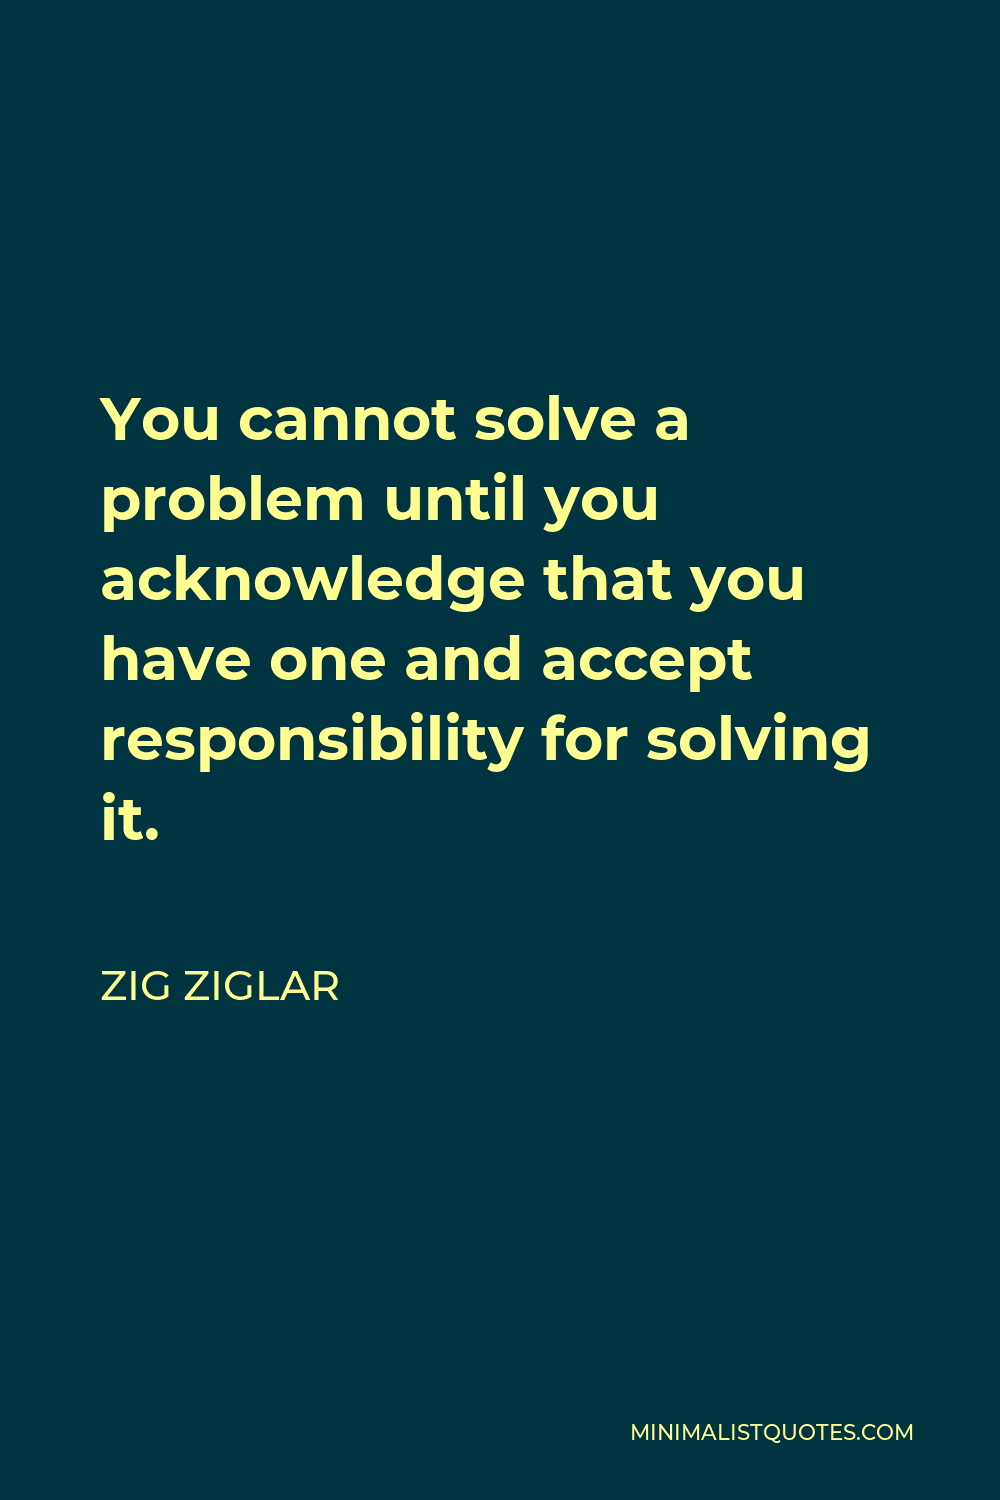 Zig Ziglar Quote - You cannot solve a problem until you acknowledge that you have one and accept responsibility for solving it.